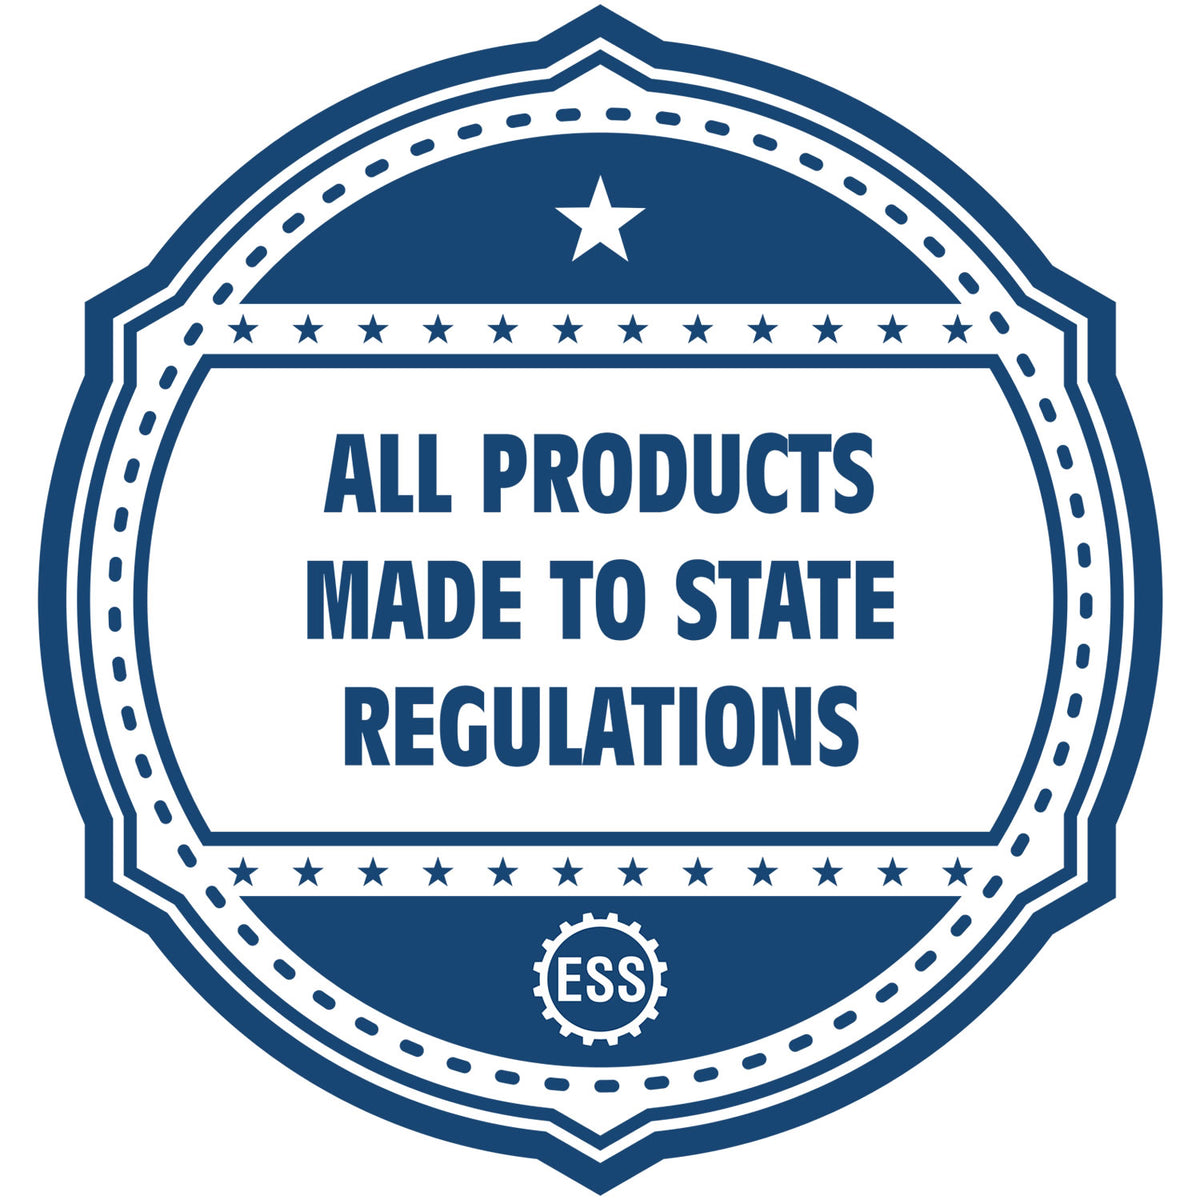 A blue icon or badge for the Heavy Duty Cast Iron Utah Geologist Seal Embosser showing that this product is made in compliance with state regulations.